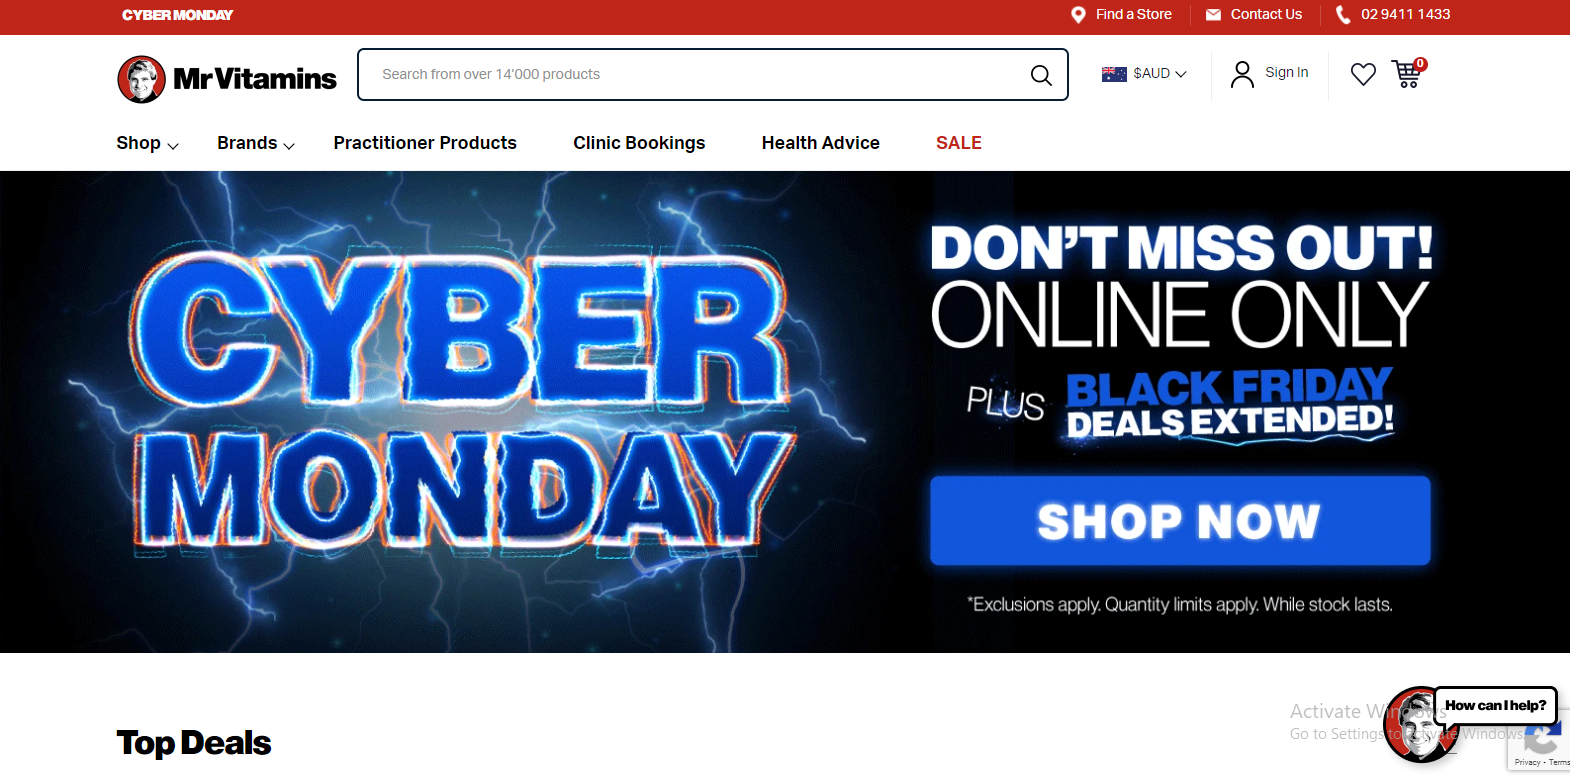 Mr Vitamins Cyber Monday up to 50% off on top sellers including Swisse, Blackmores, & more